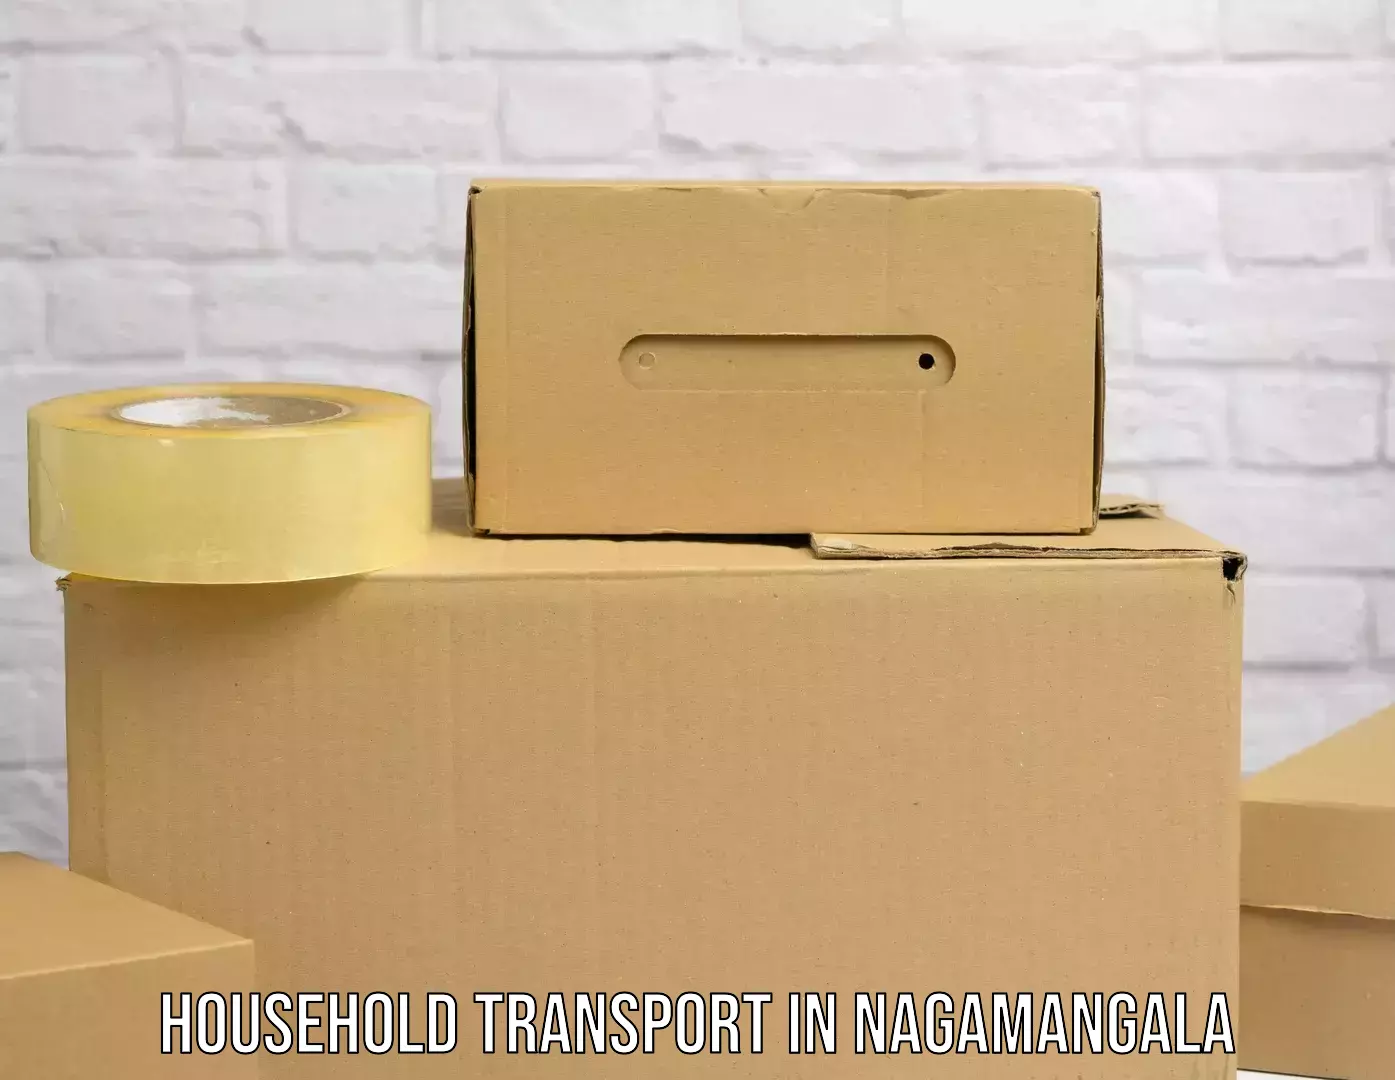 Household goods transport service in Nagamangala